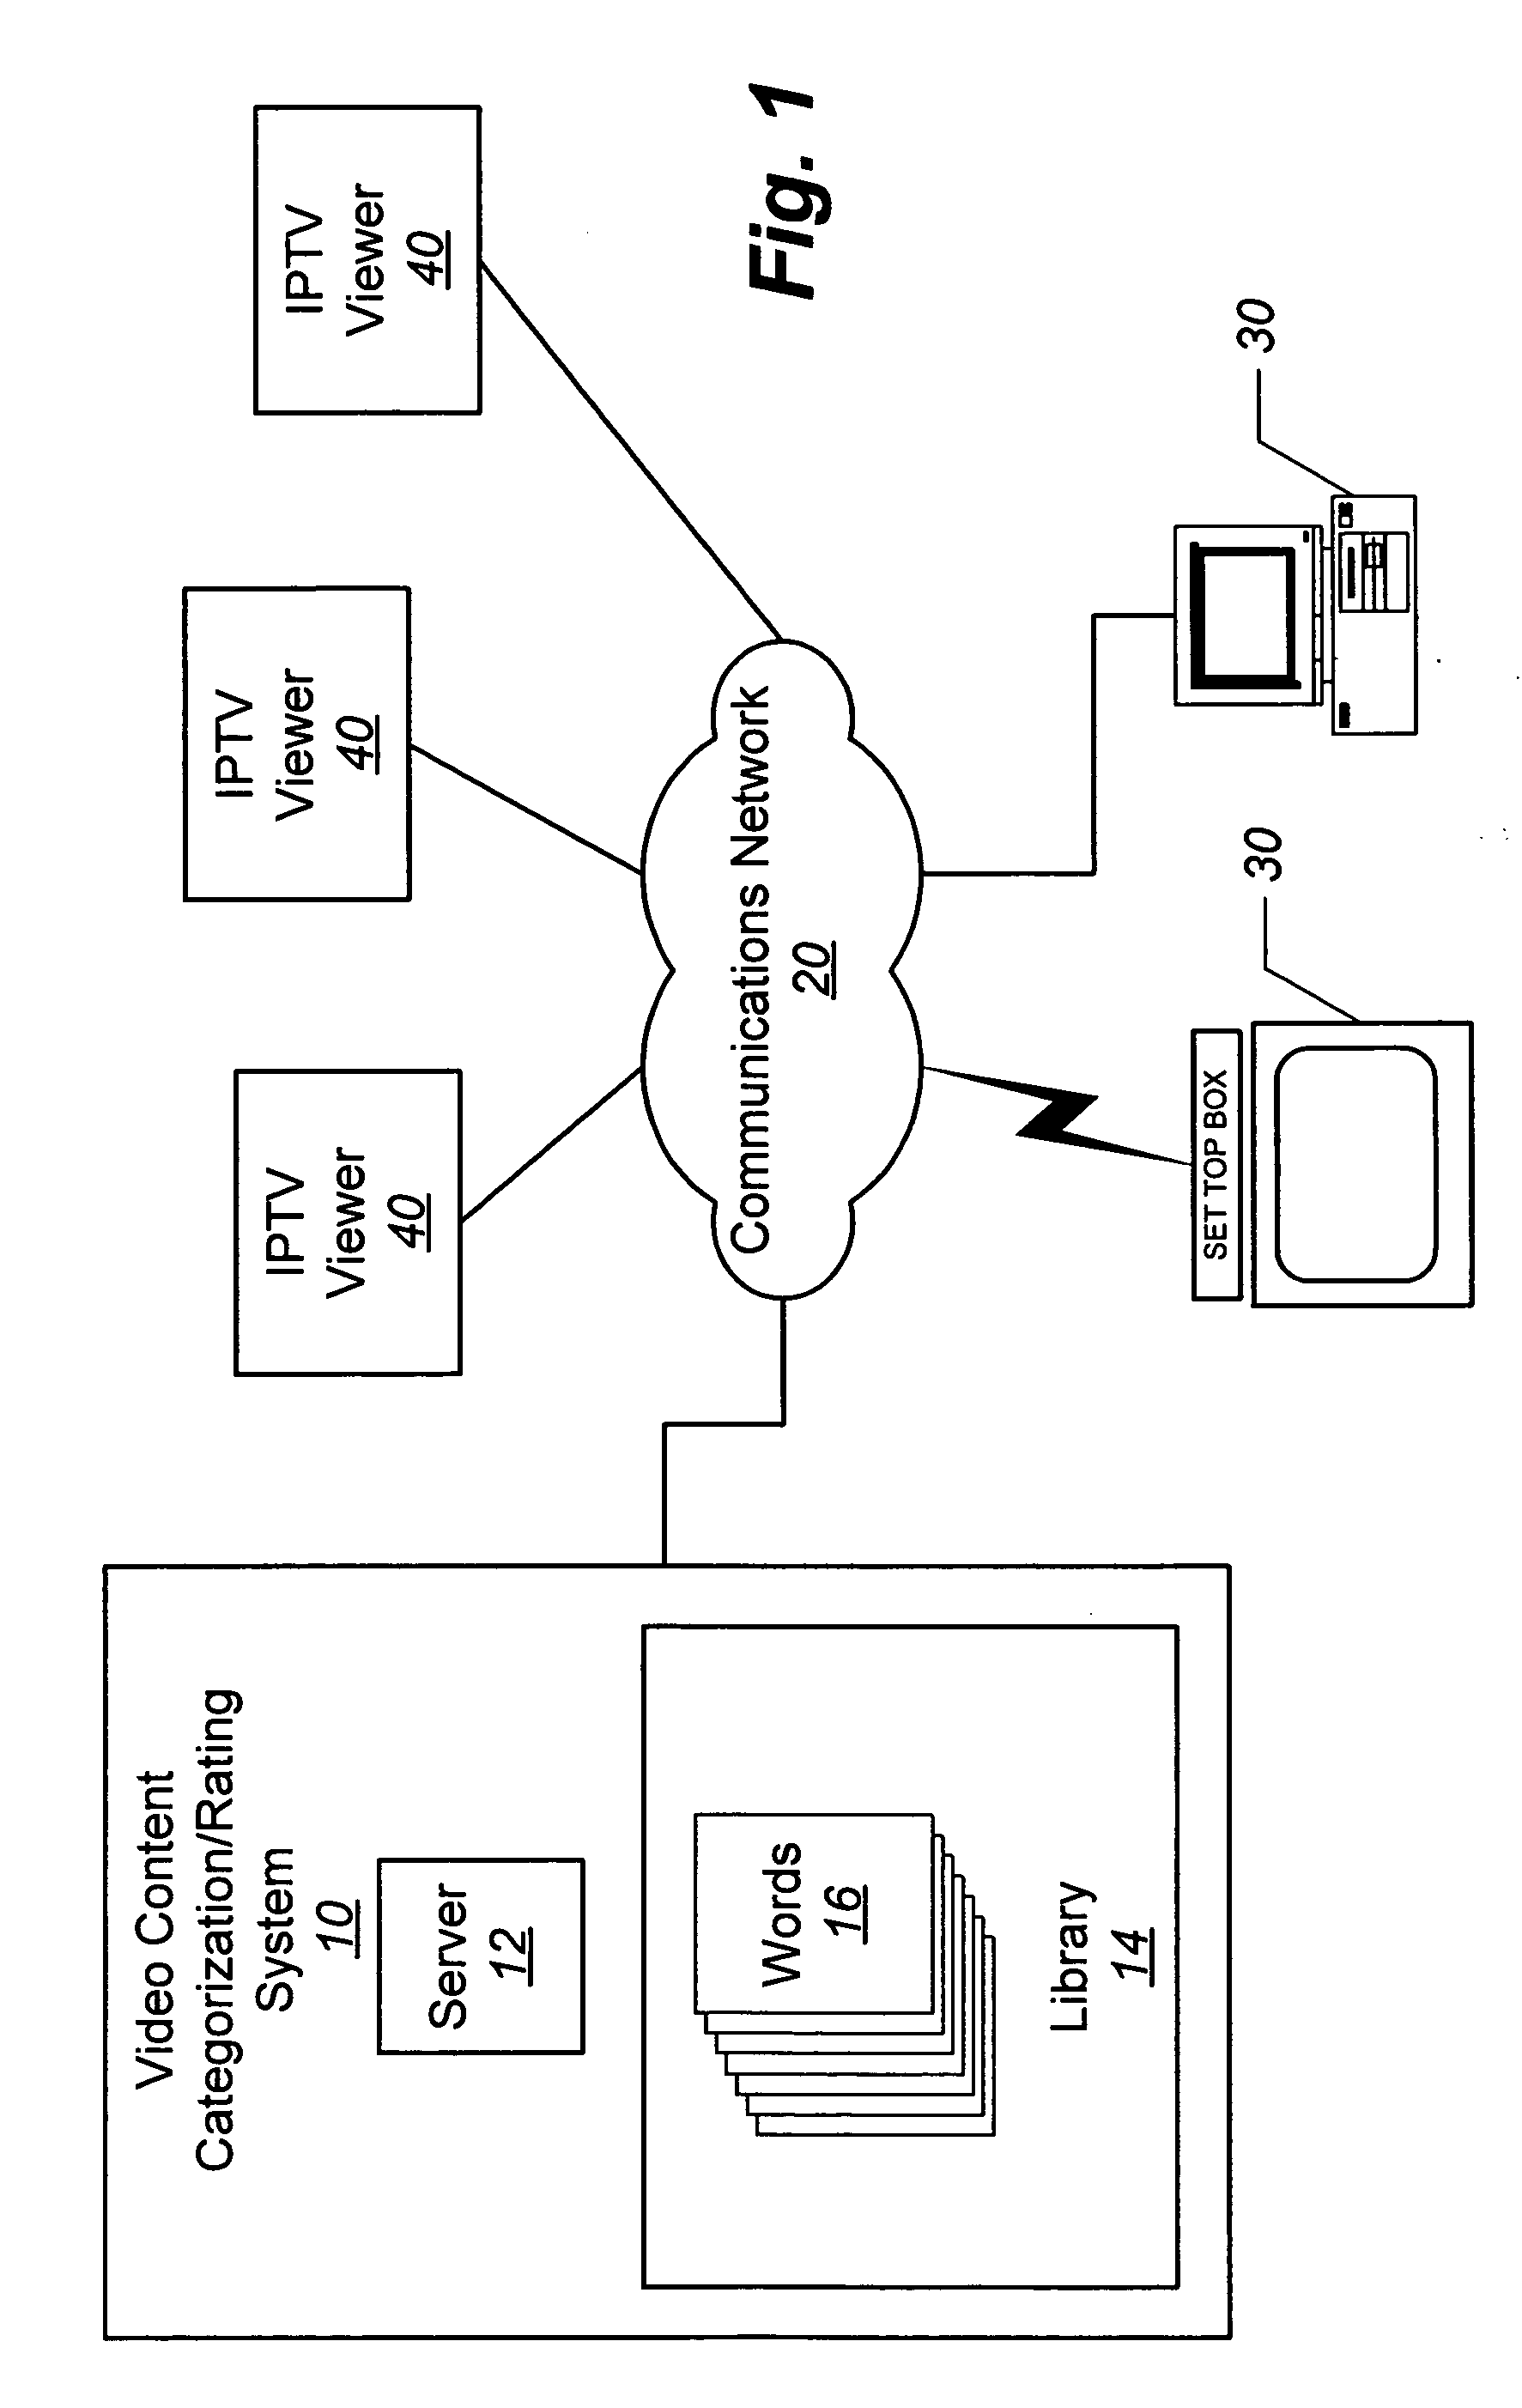 Methods, systems, and computer program products for categorizing/rating content uploaded to a network for broadcasting